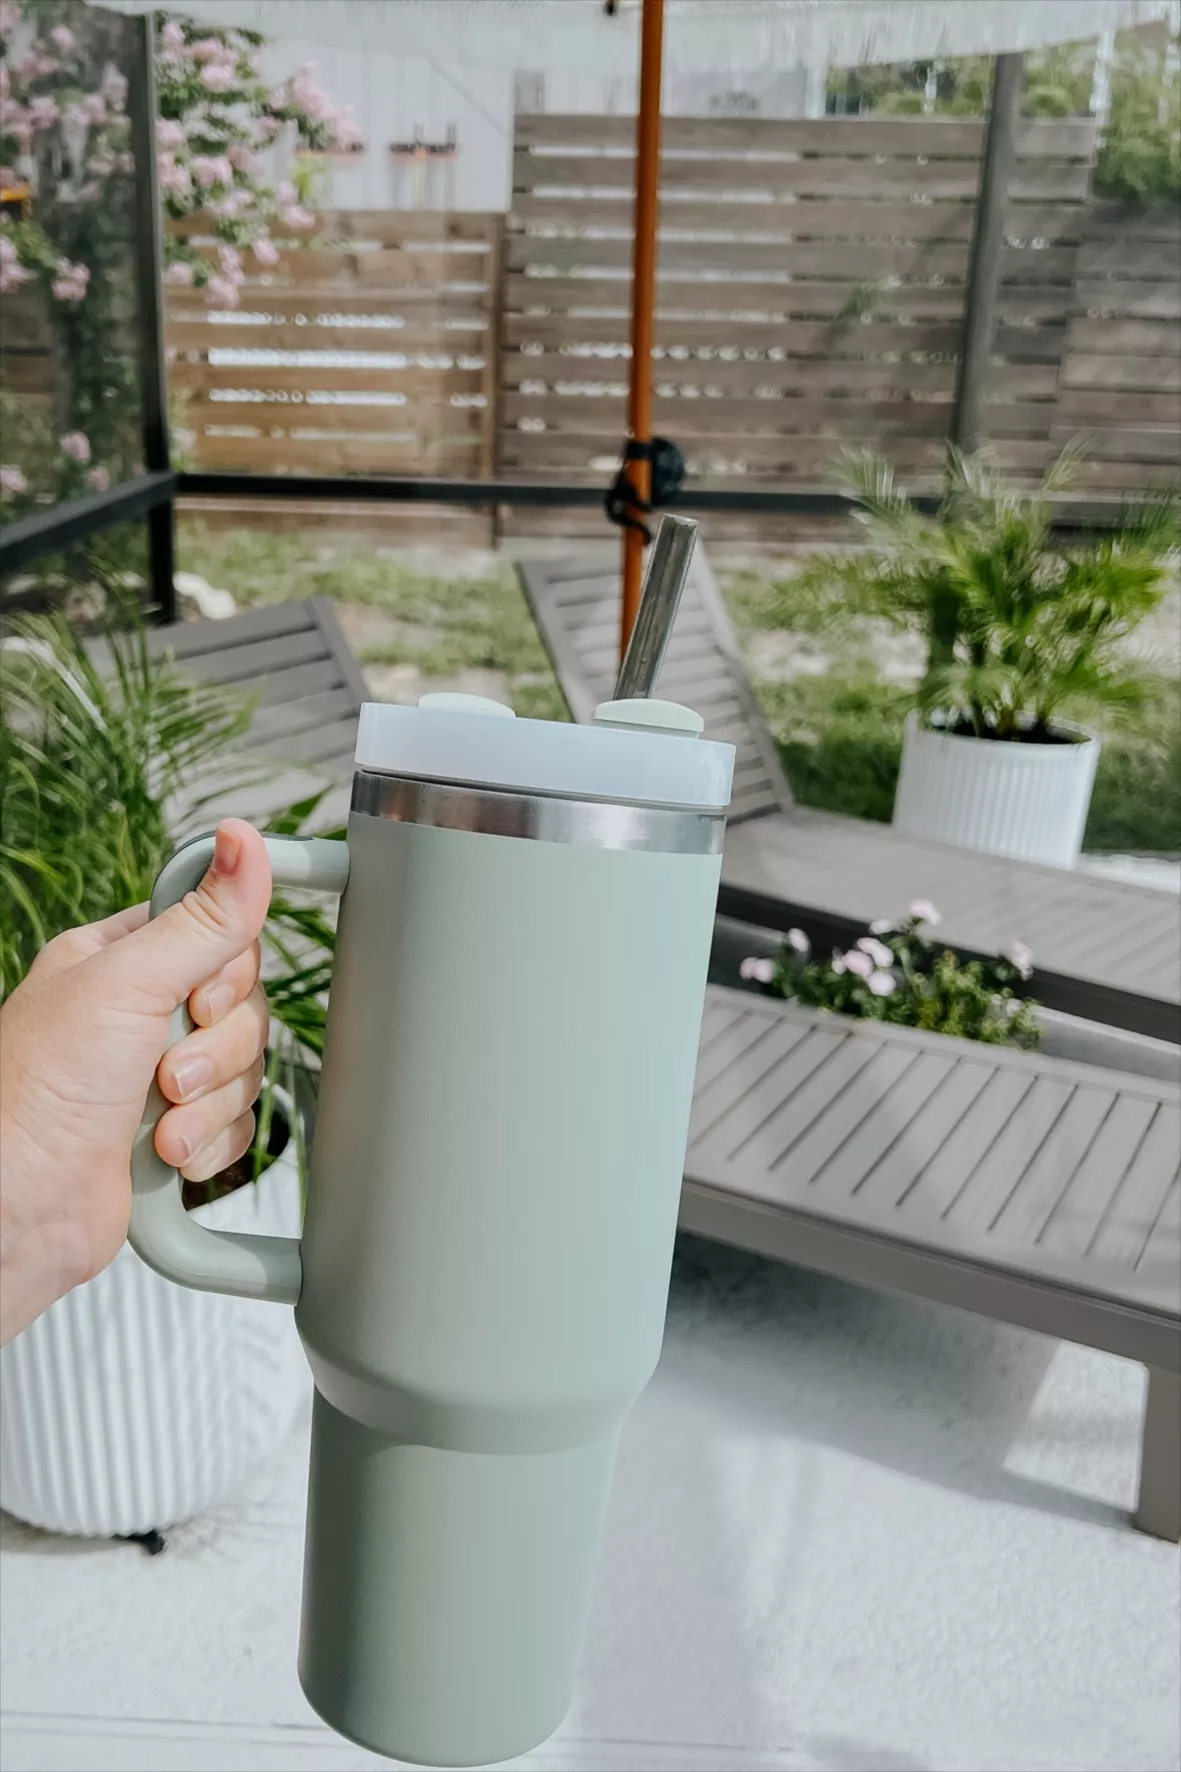 40 oz Tumbler With Handle and … curated on LTK